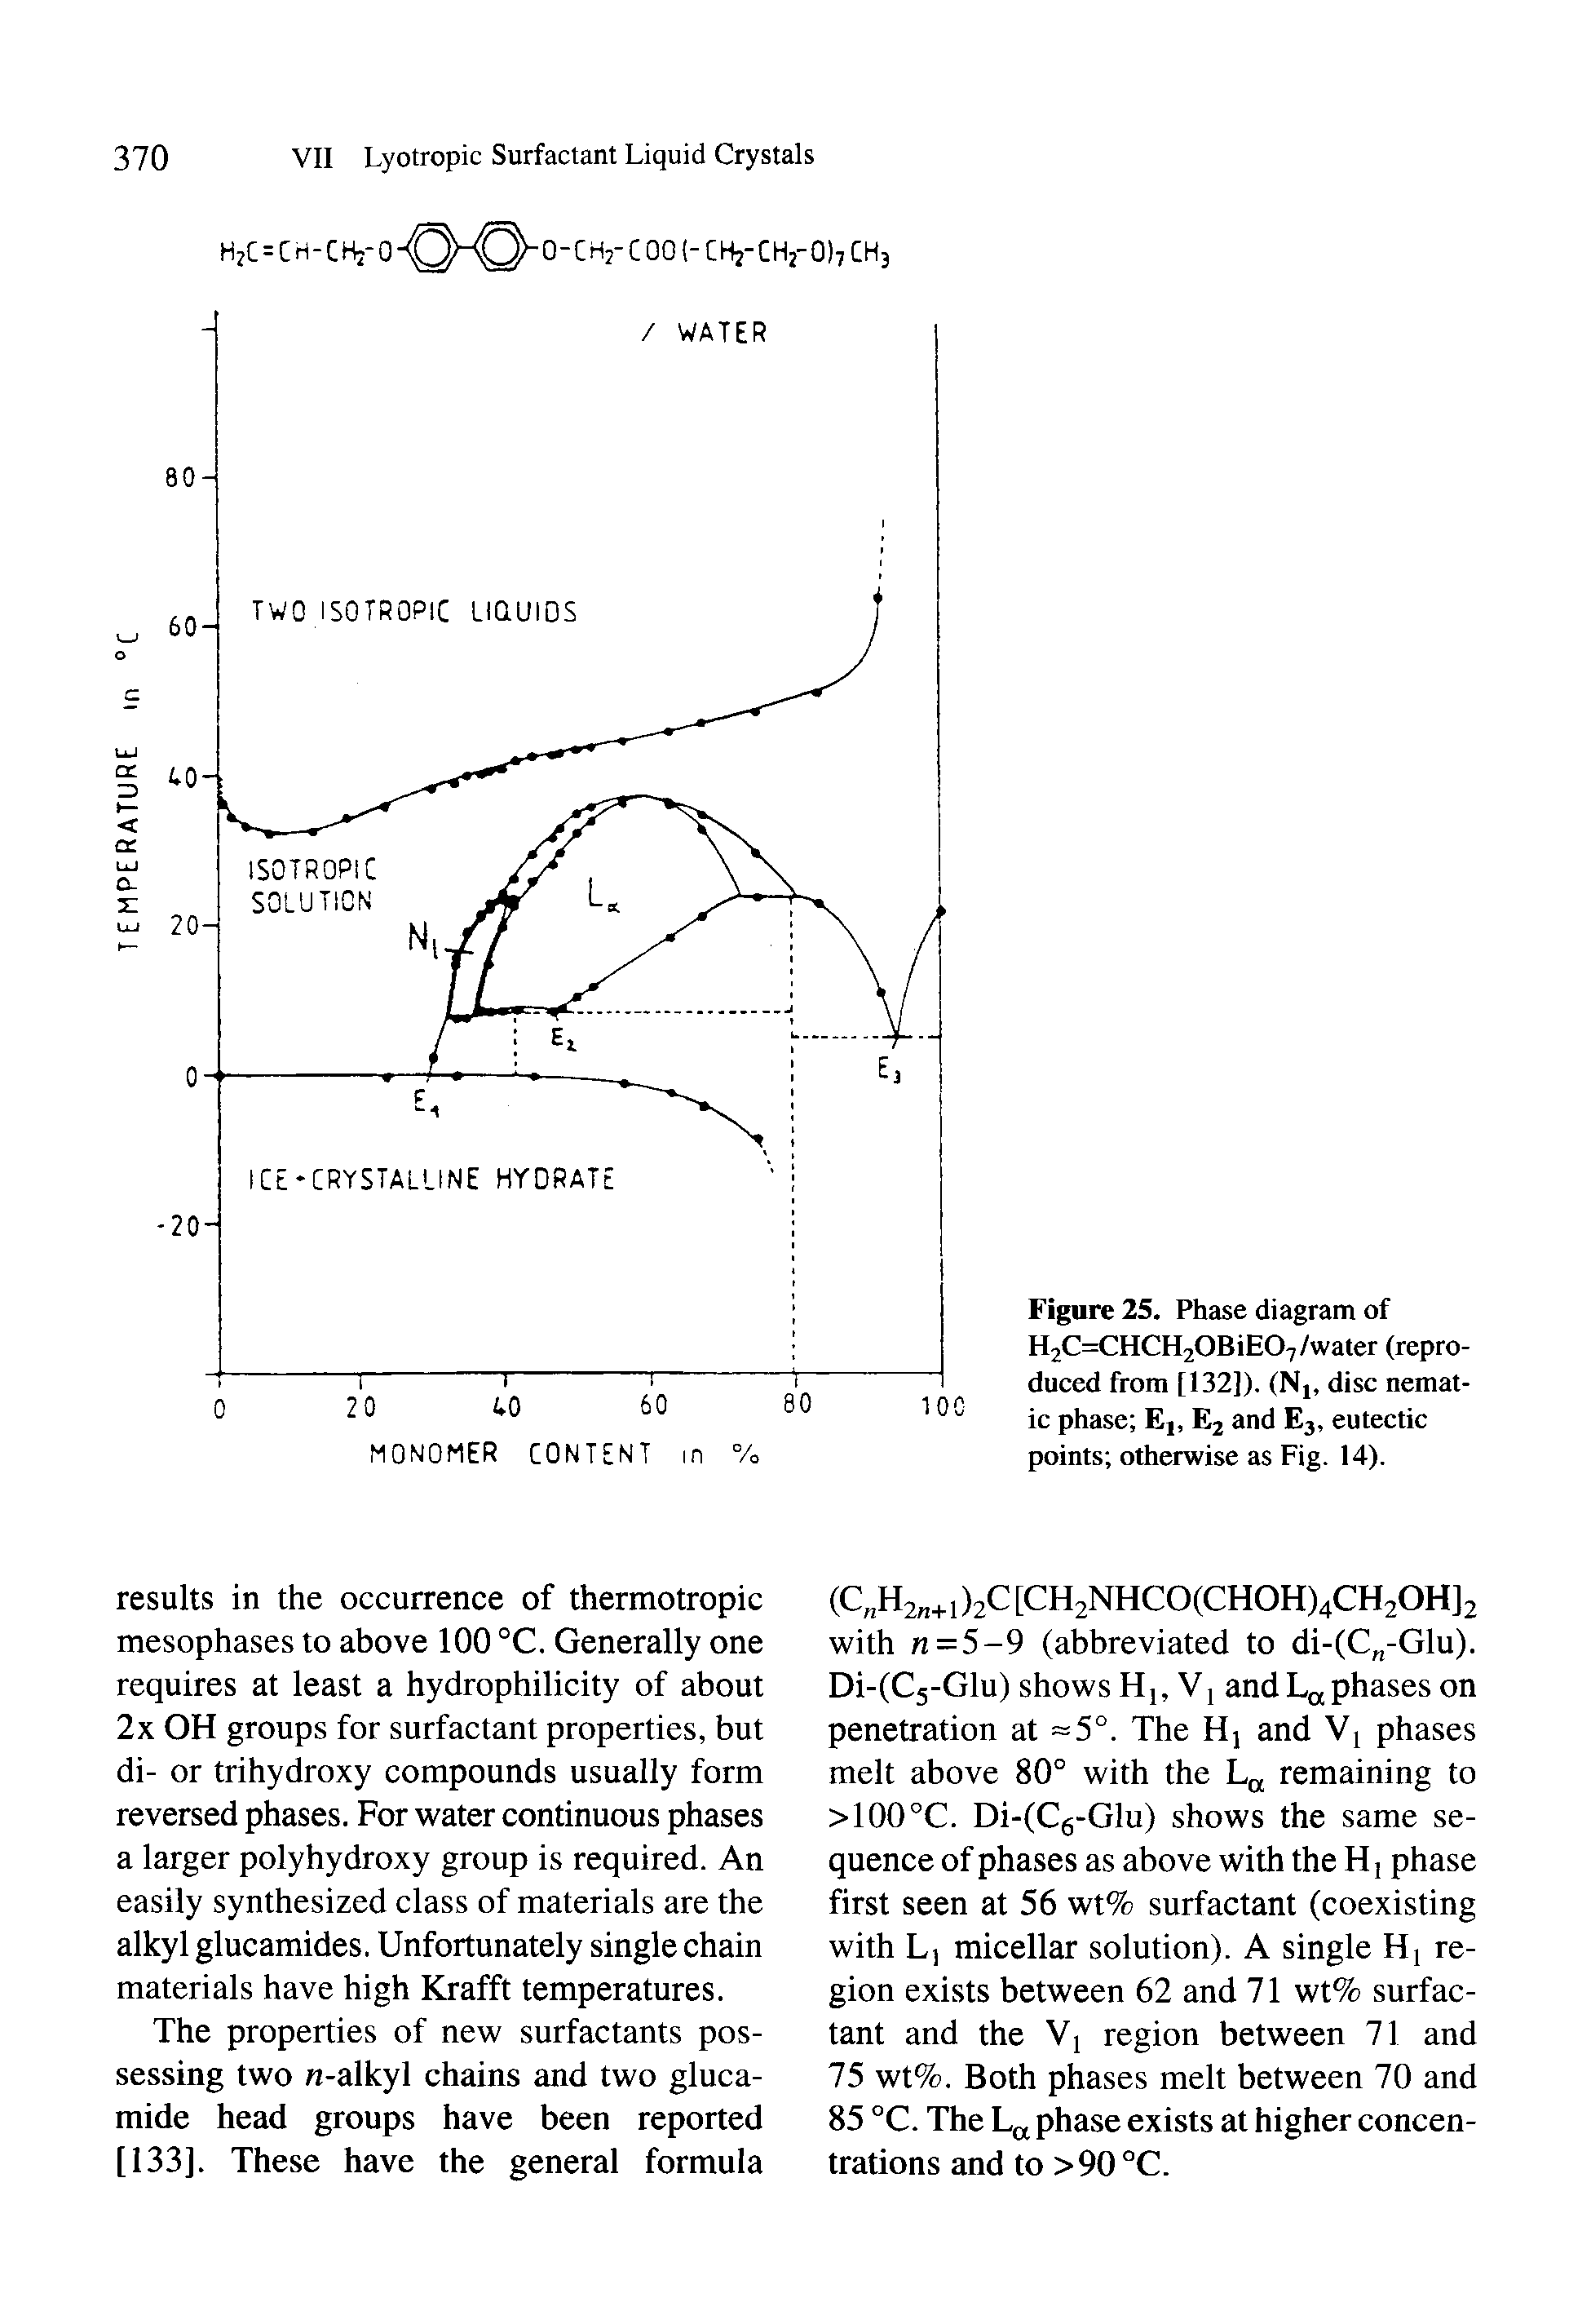 Figure 25. Phase diagram of H2C=CHCH20BiE07/water (reproduced from [132]). (Ni, disc nematic phase E], E2 and E3, eutectic points otherwise as Fig. 14).